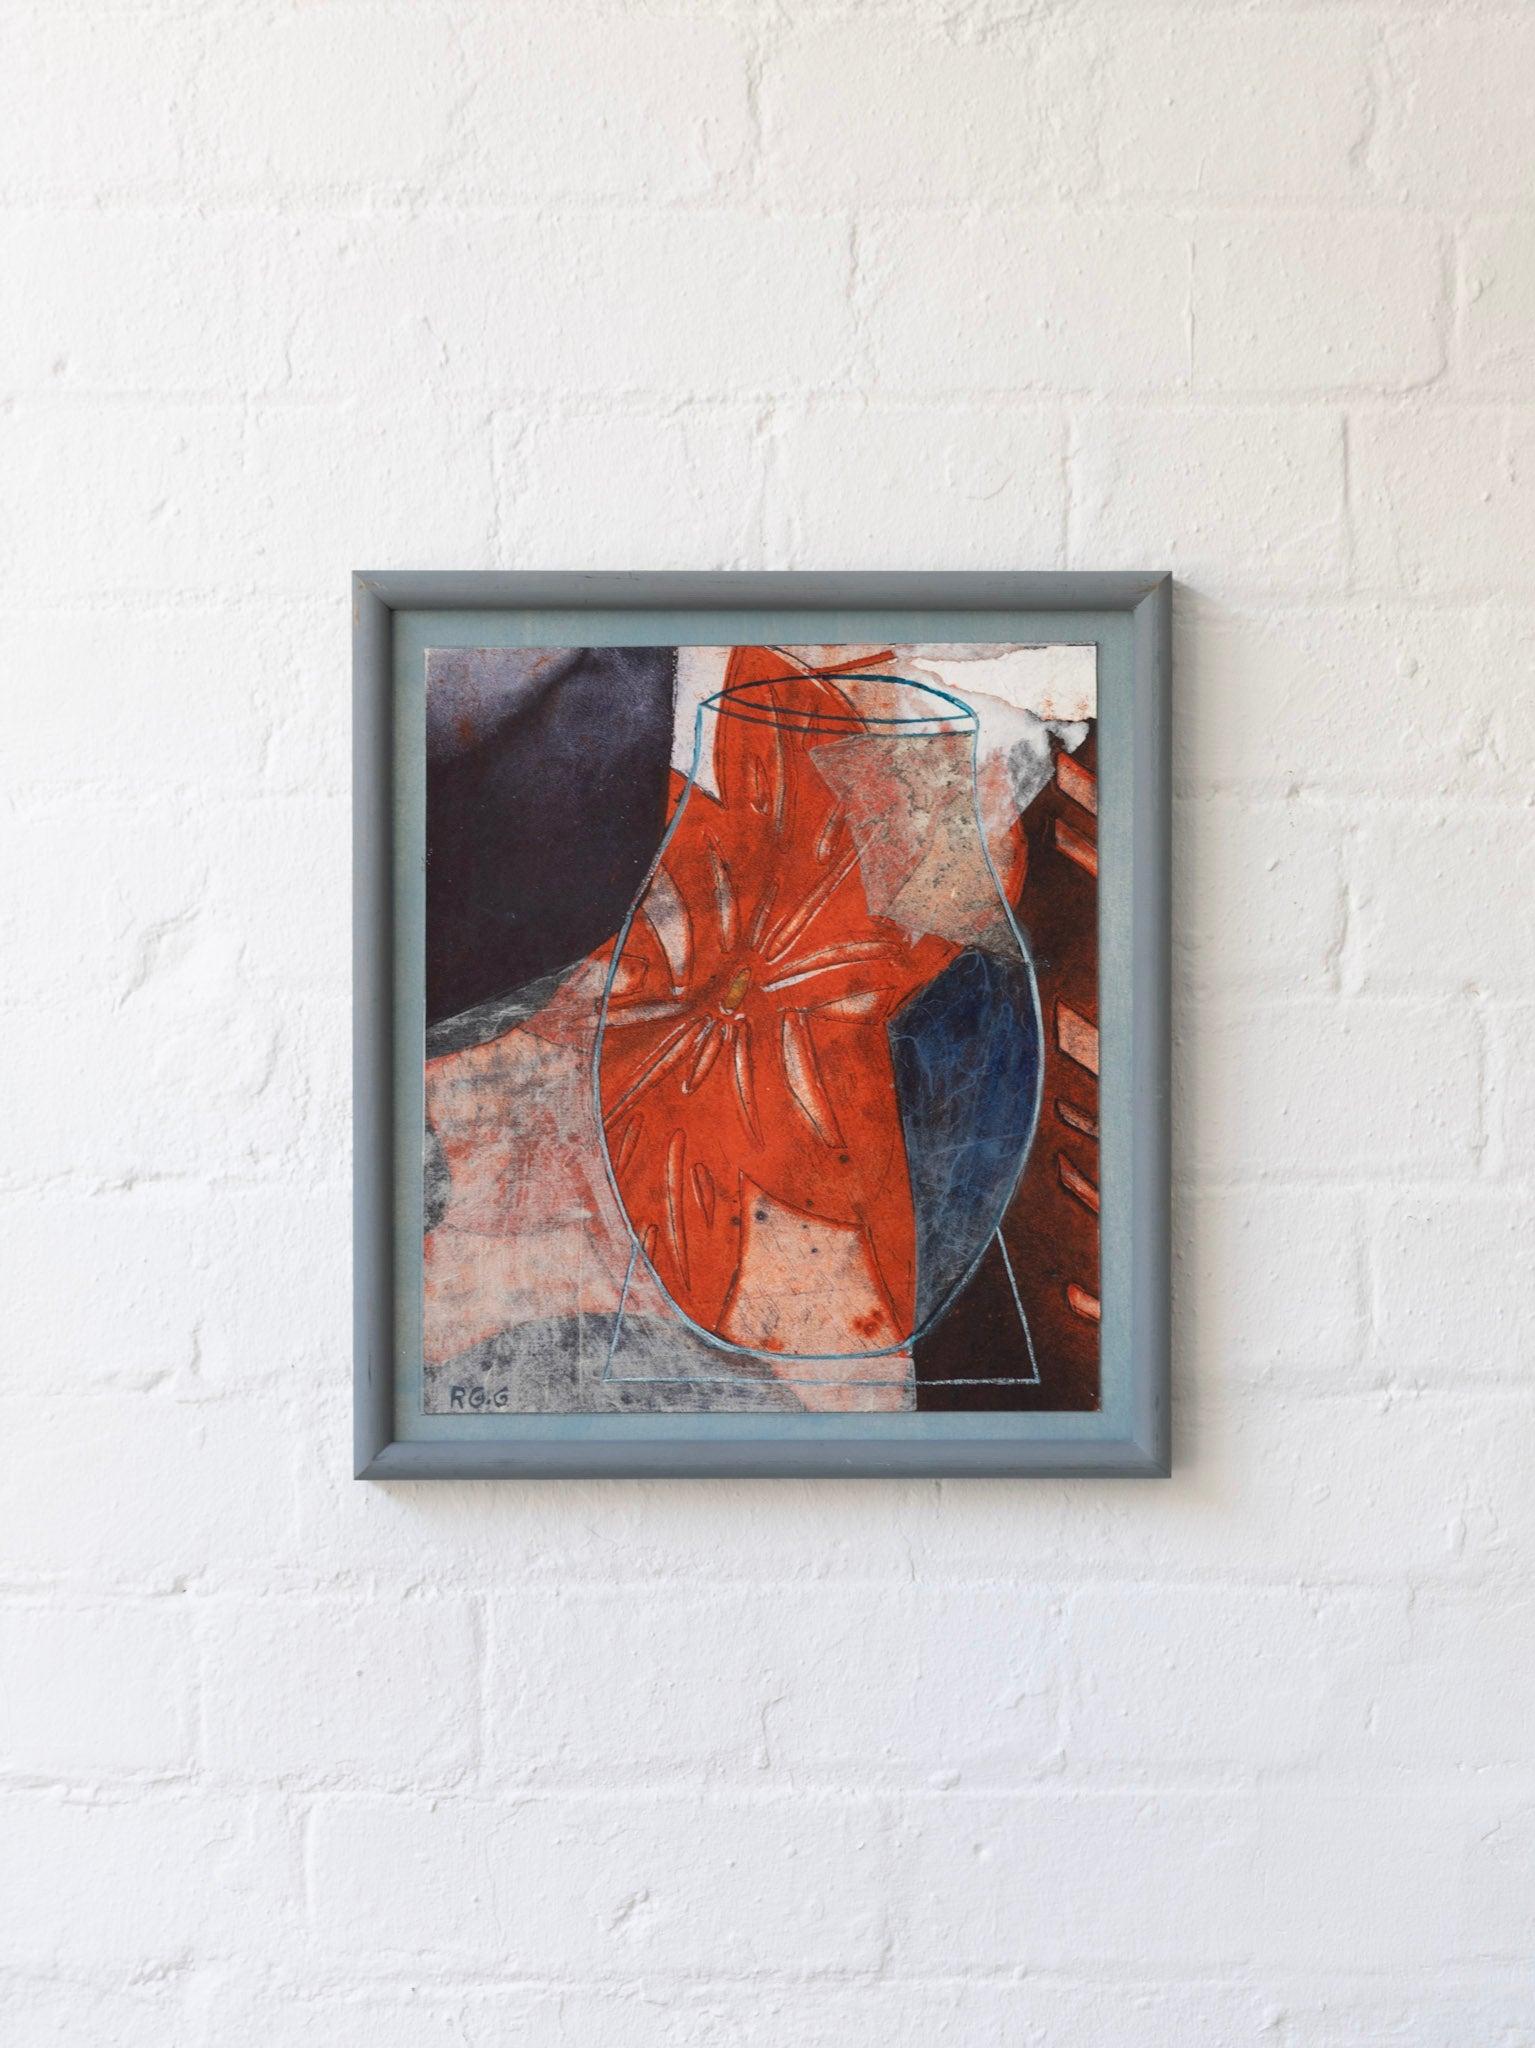 An abstract composition with flowers and vase. Signed to the lower left by Ruth Goldman-Grosin (b.1941). Framed and glazed, ready to hang. 

Artist: Ruth Goldman-Grosin
Medium: Mixed media
Dimensions: H 355mm x W 320mm
Origin: England
Condition: